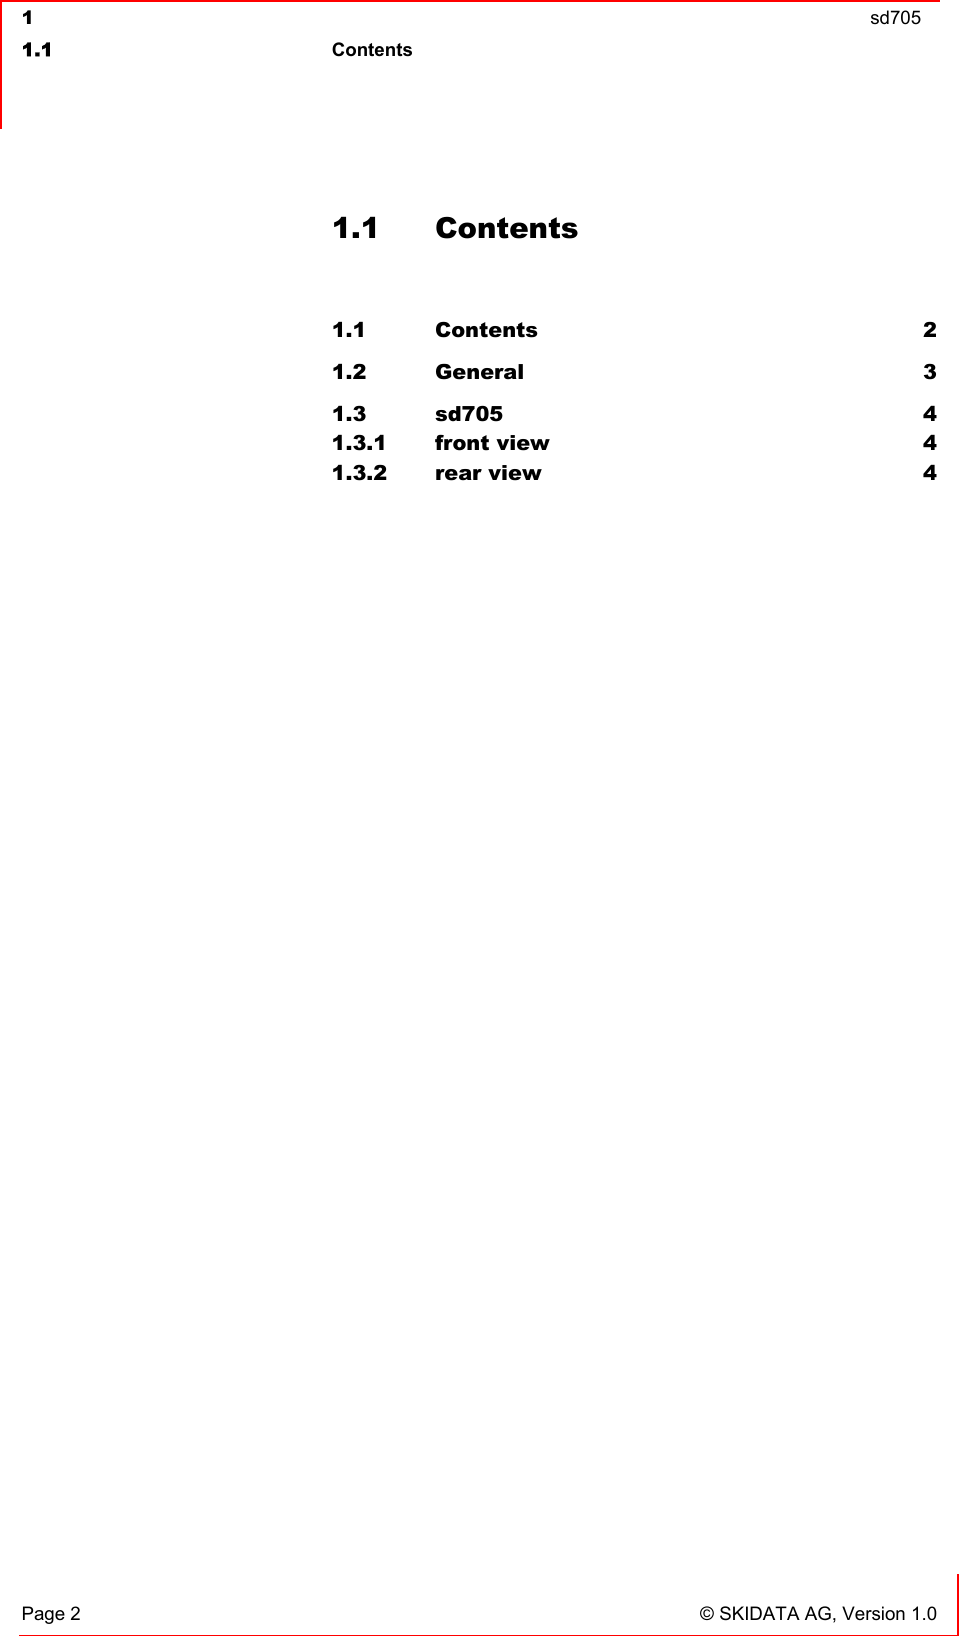  1  sd705  1.1 Contents   Page 2  © SKIDATA AG, Version 1.0 1.1 Contents  1.1 Contents 2 1.2 General 3 1.3 sd705 4 1.3.1 front view  4 1.3.2 rear view  4  